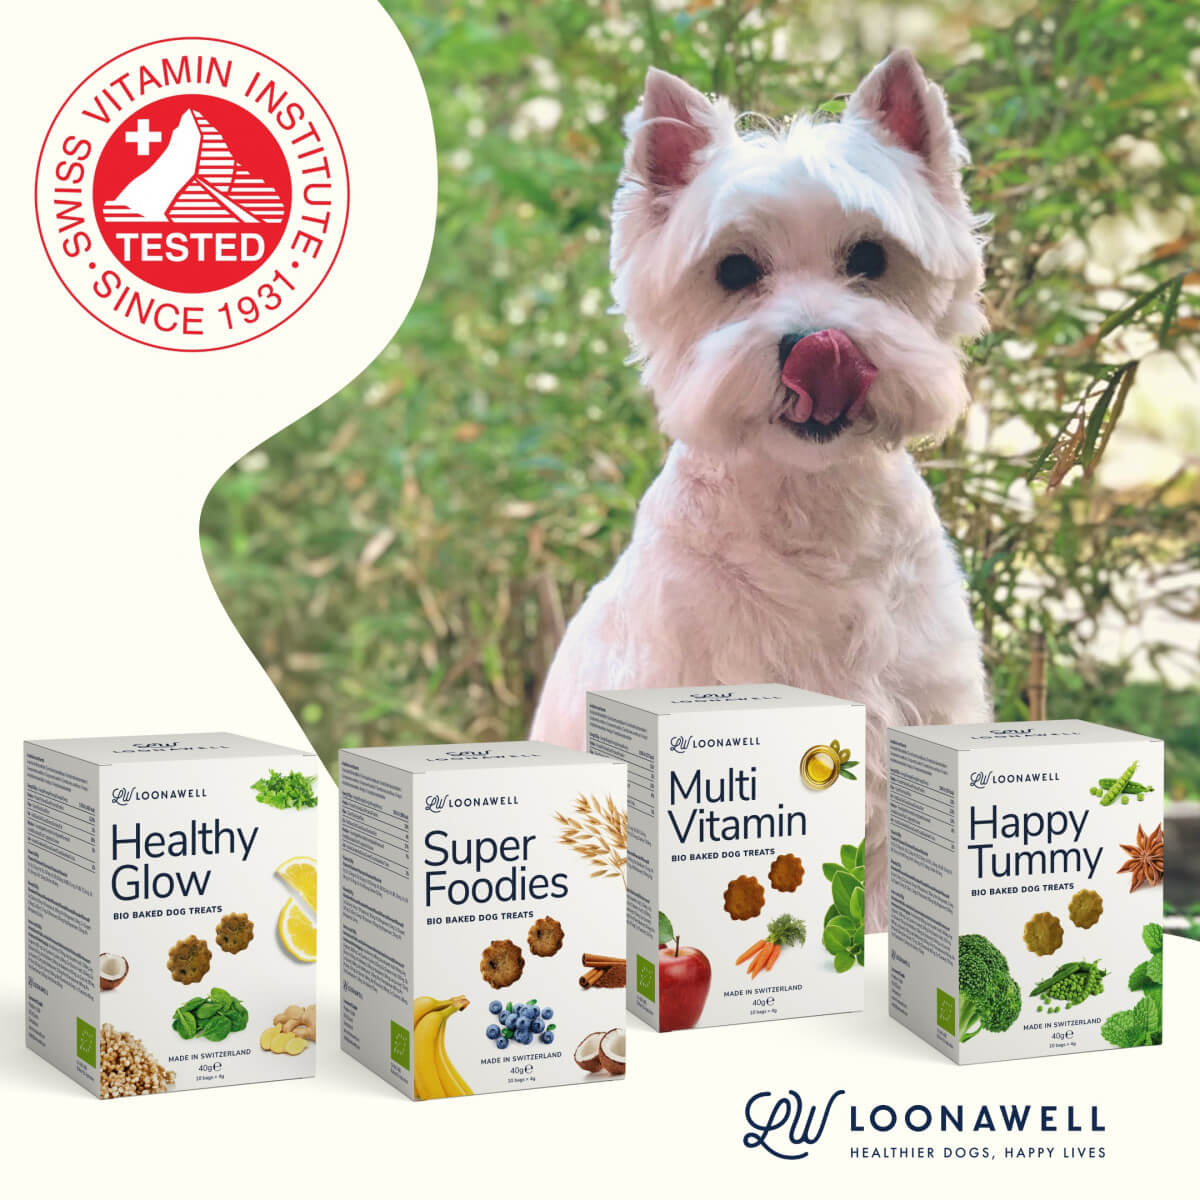 LOONAWELL becomes the first Pet Food brand in the world to receive the Swiss Vitamin Institute label